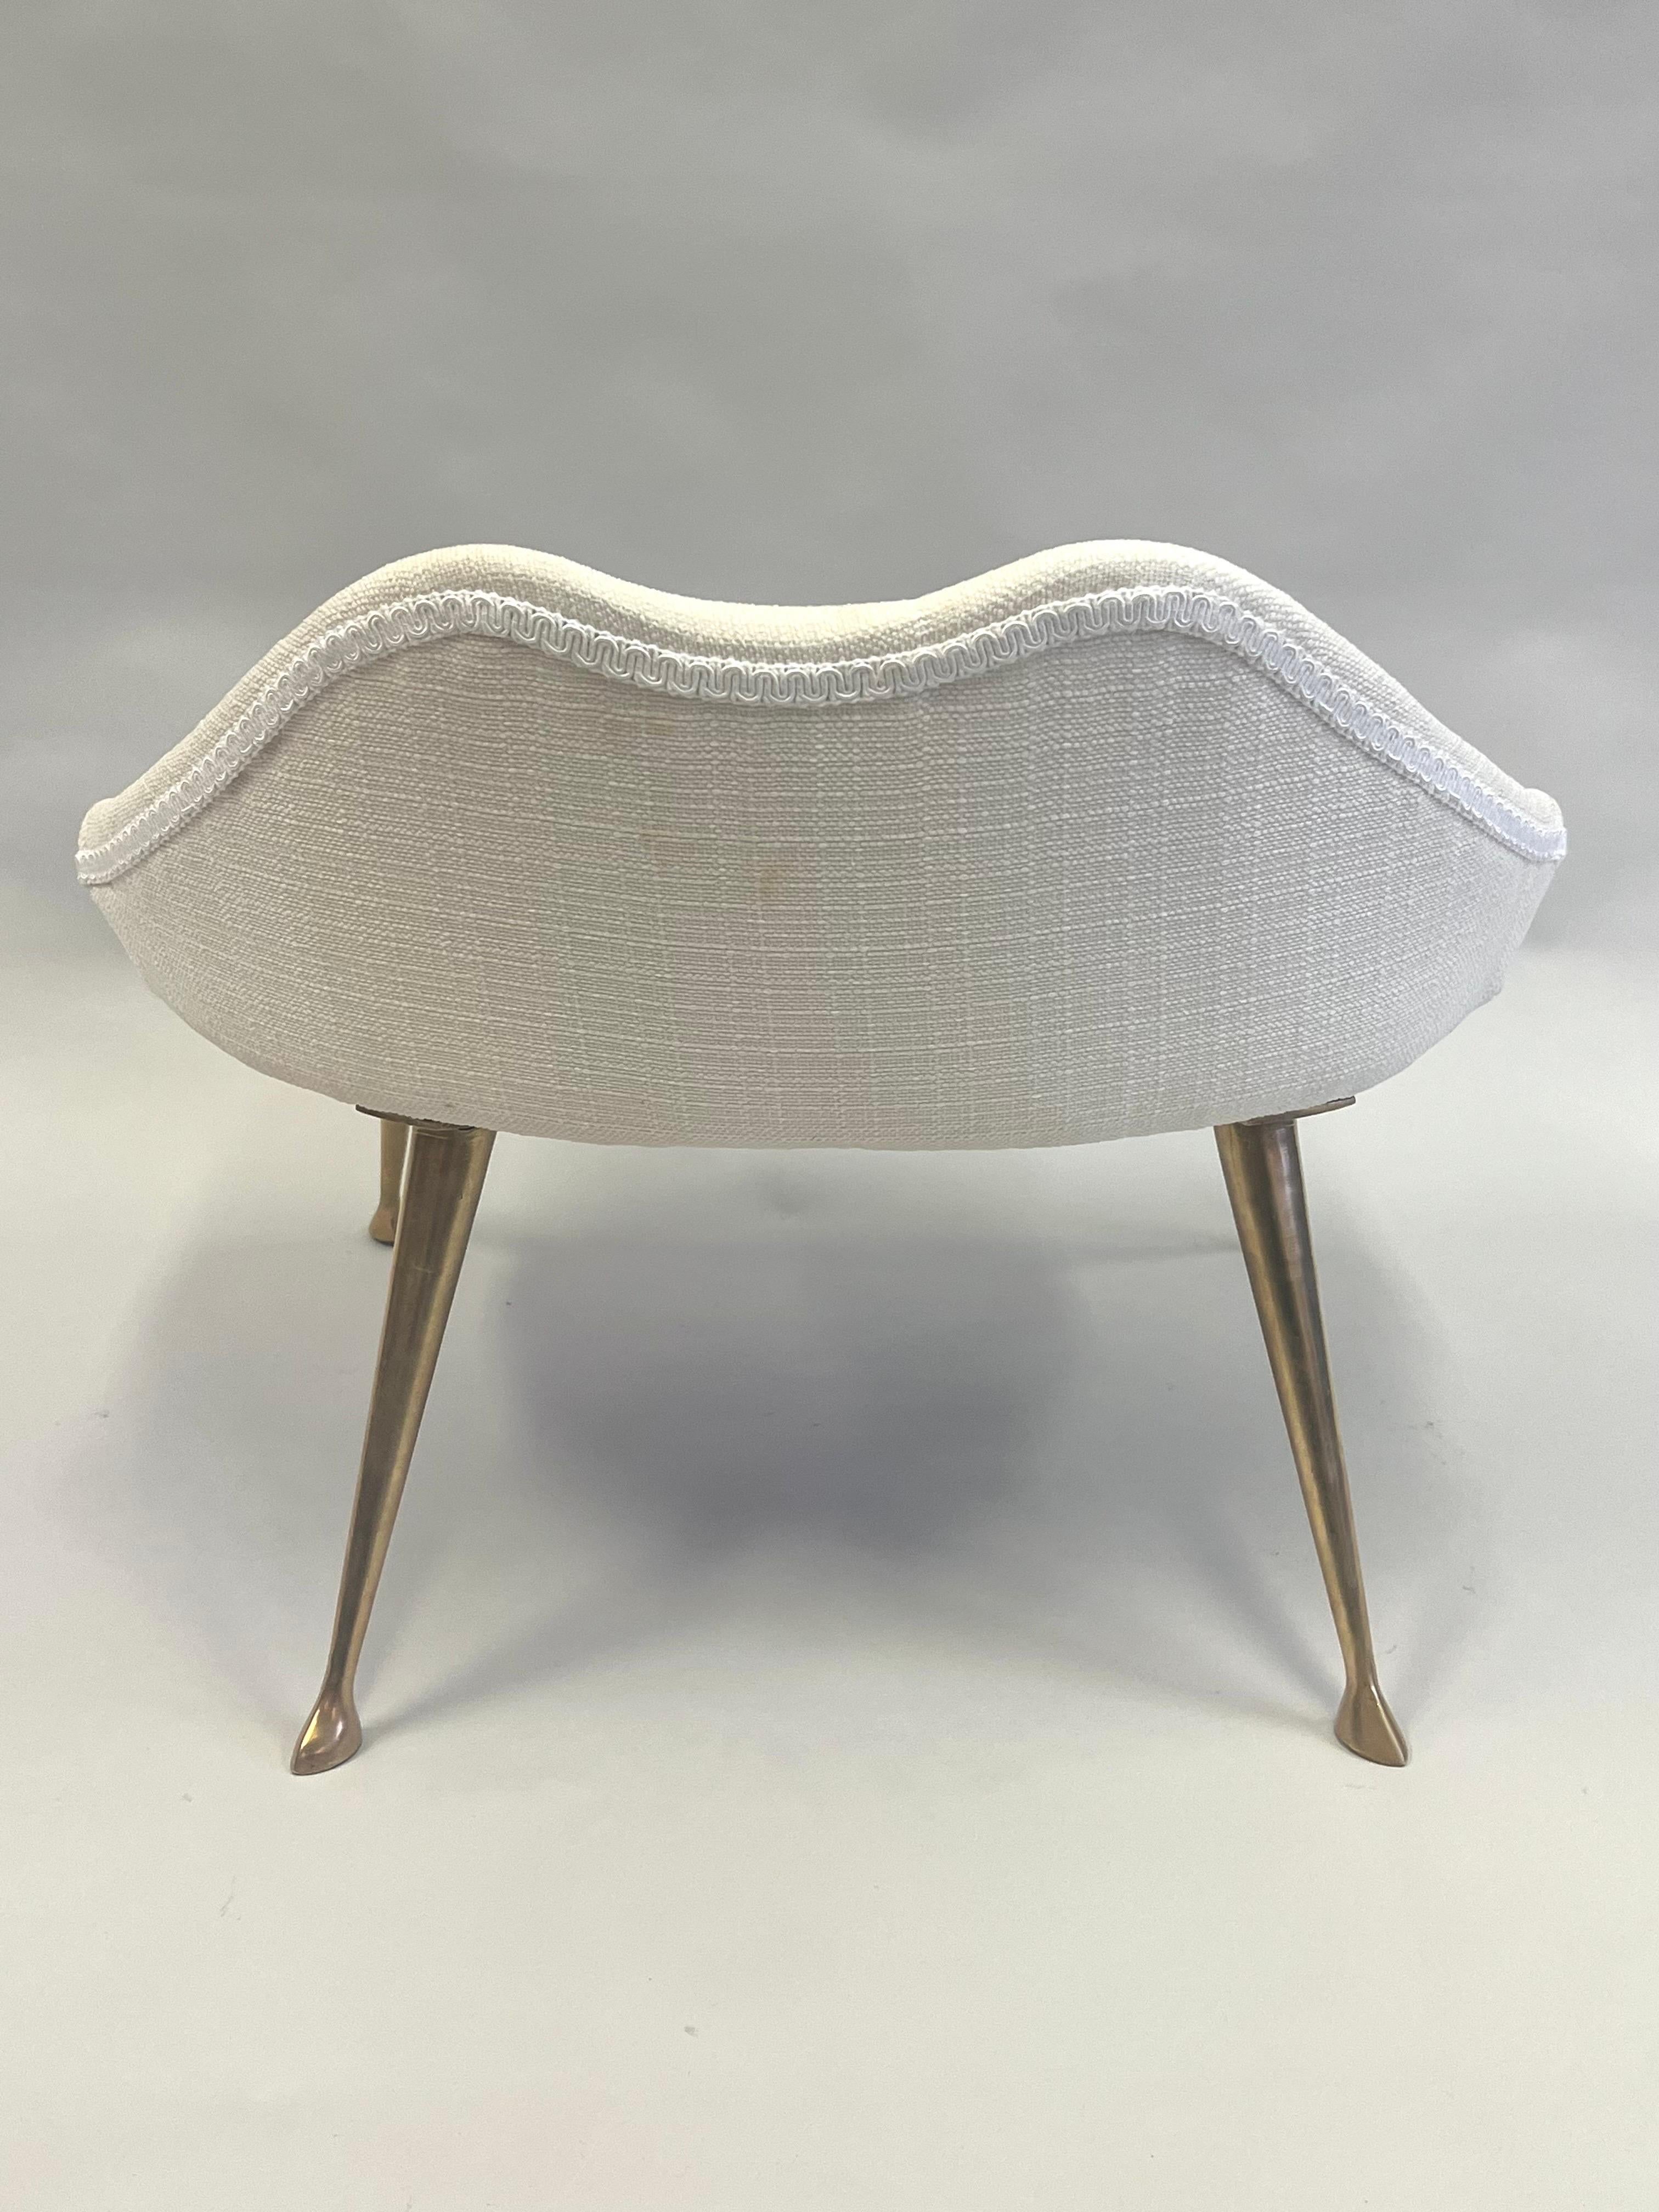 Italian Mid-CenturyModern Brass & Cotton Vanity Chair Attributed to Marco Zanuso For Sale 4